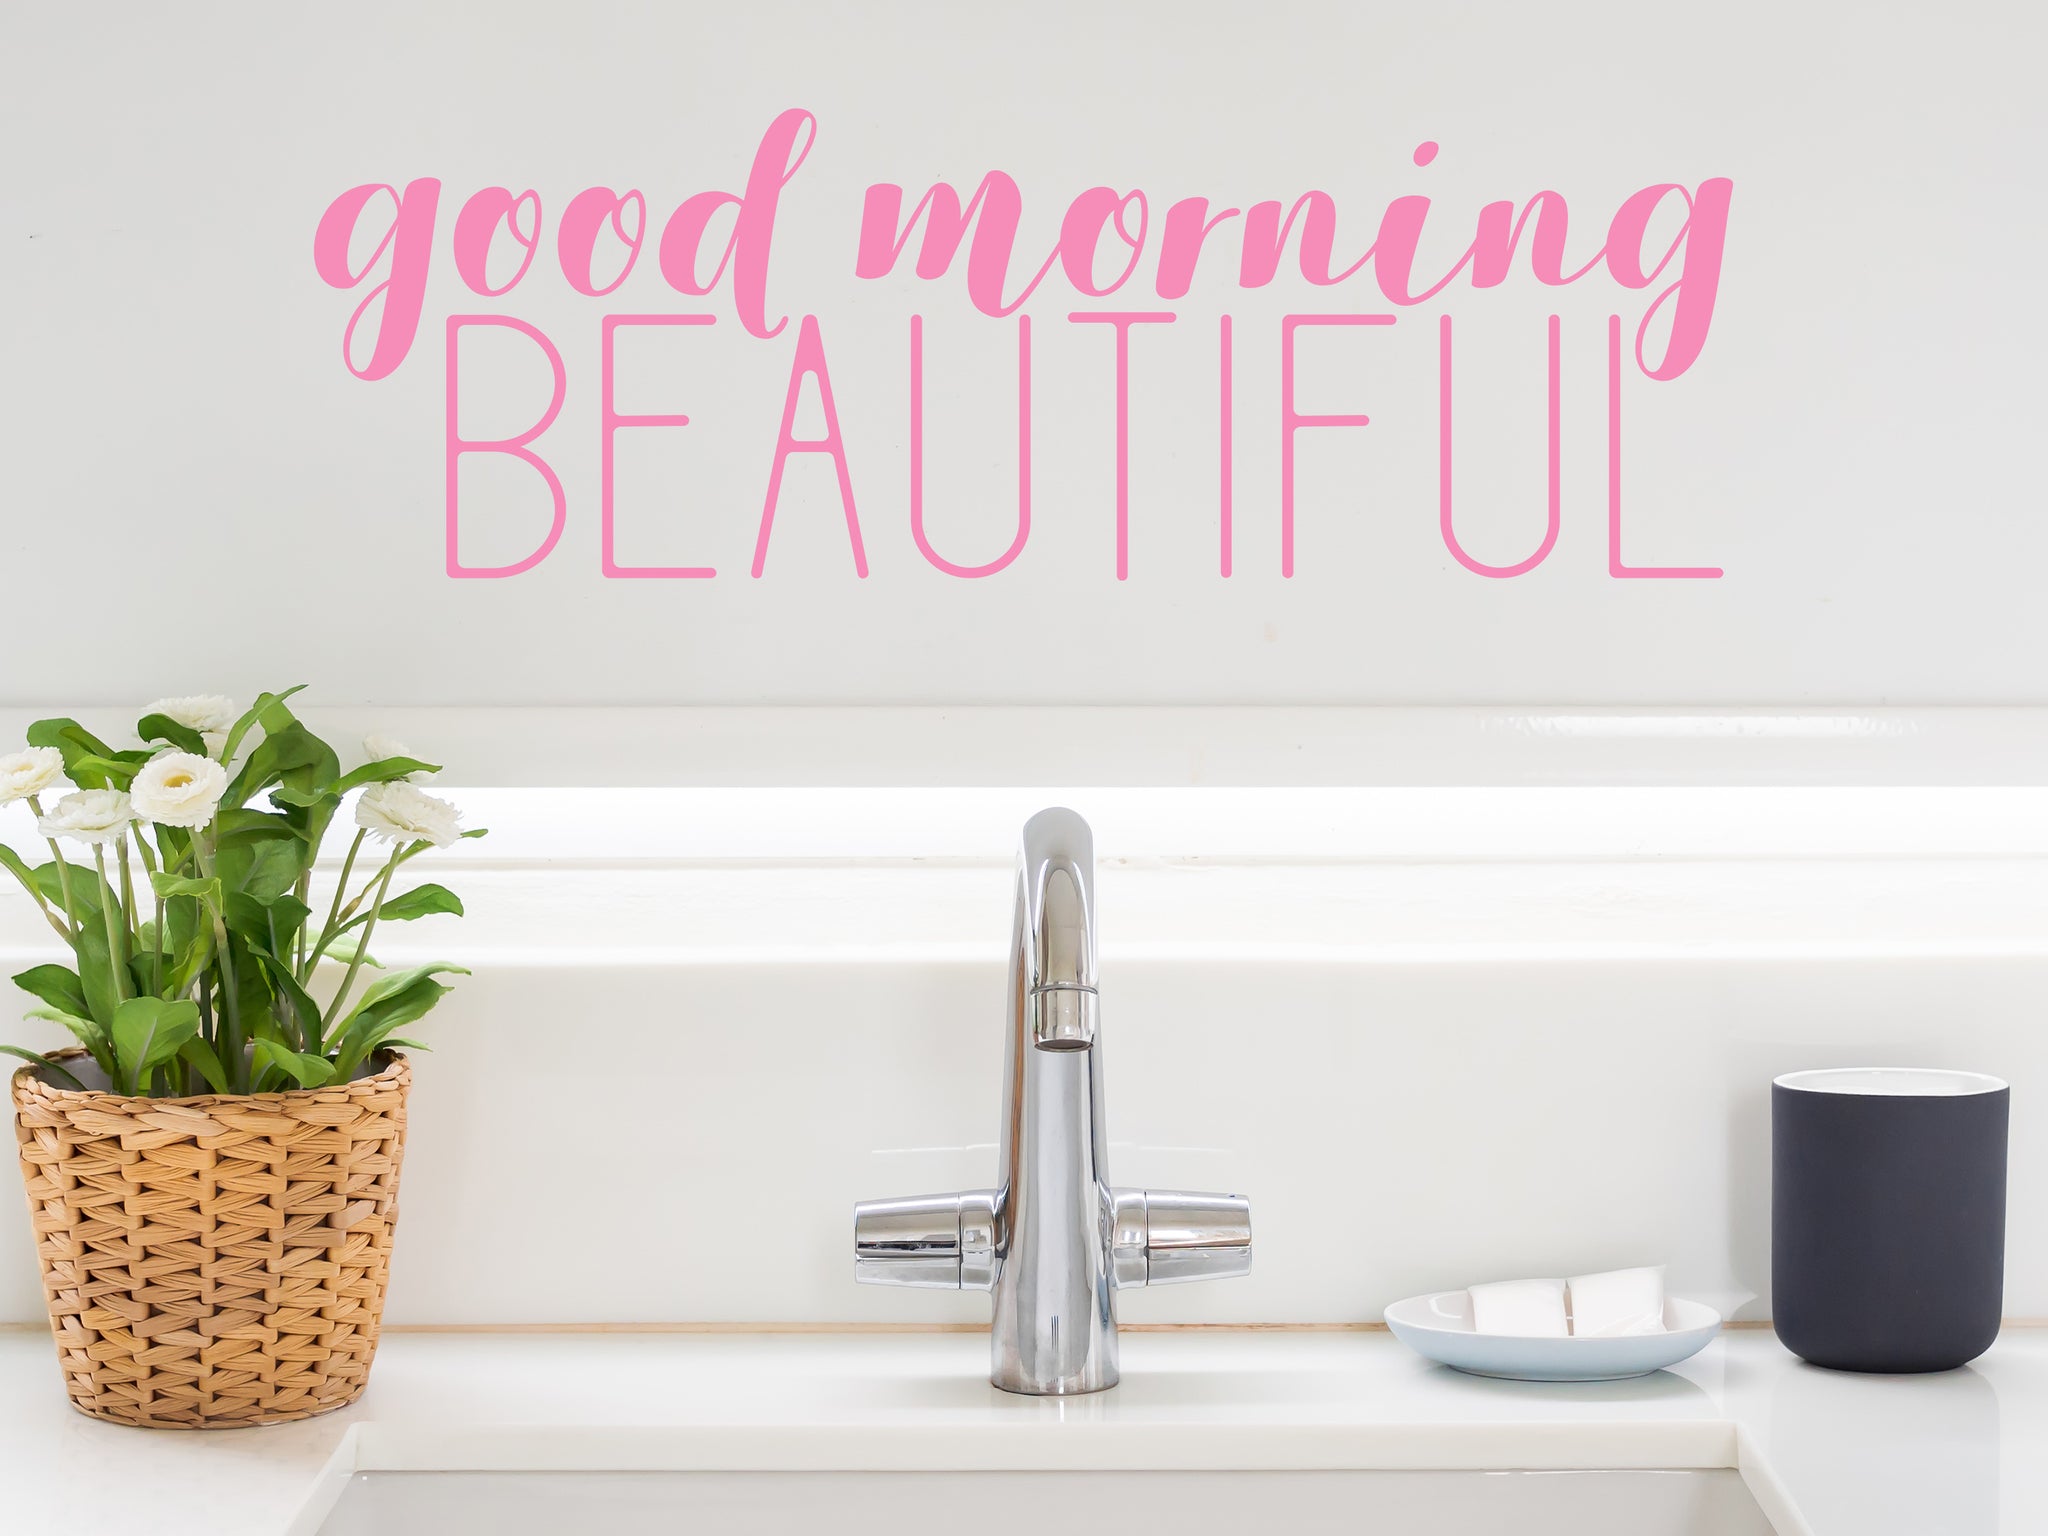 Good Morning Beautiful | Bathroom Wall and Mirror Decal - Story of Home ...